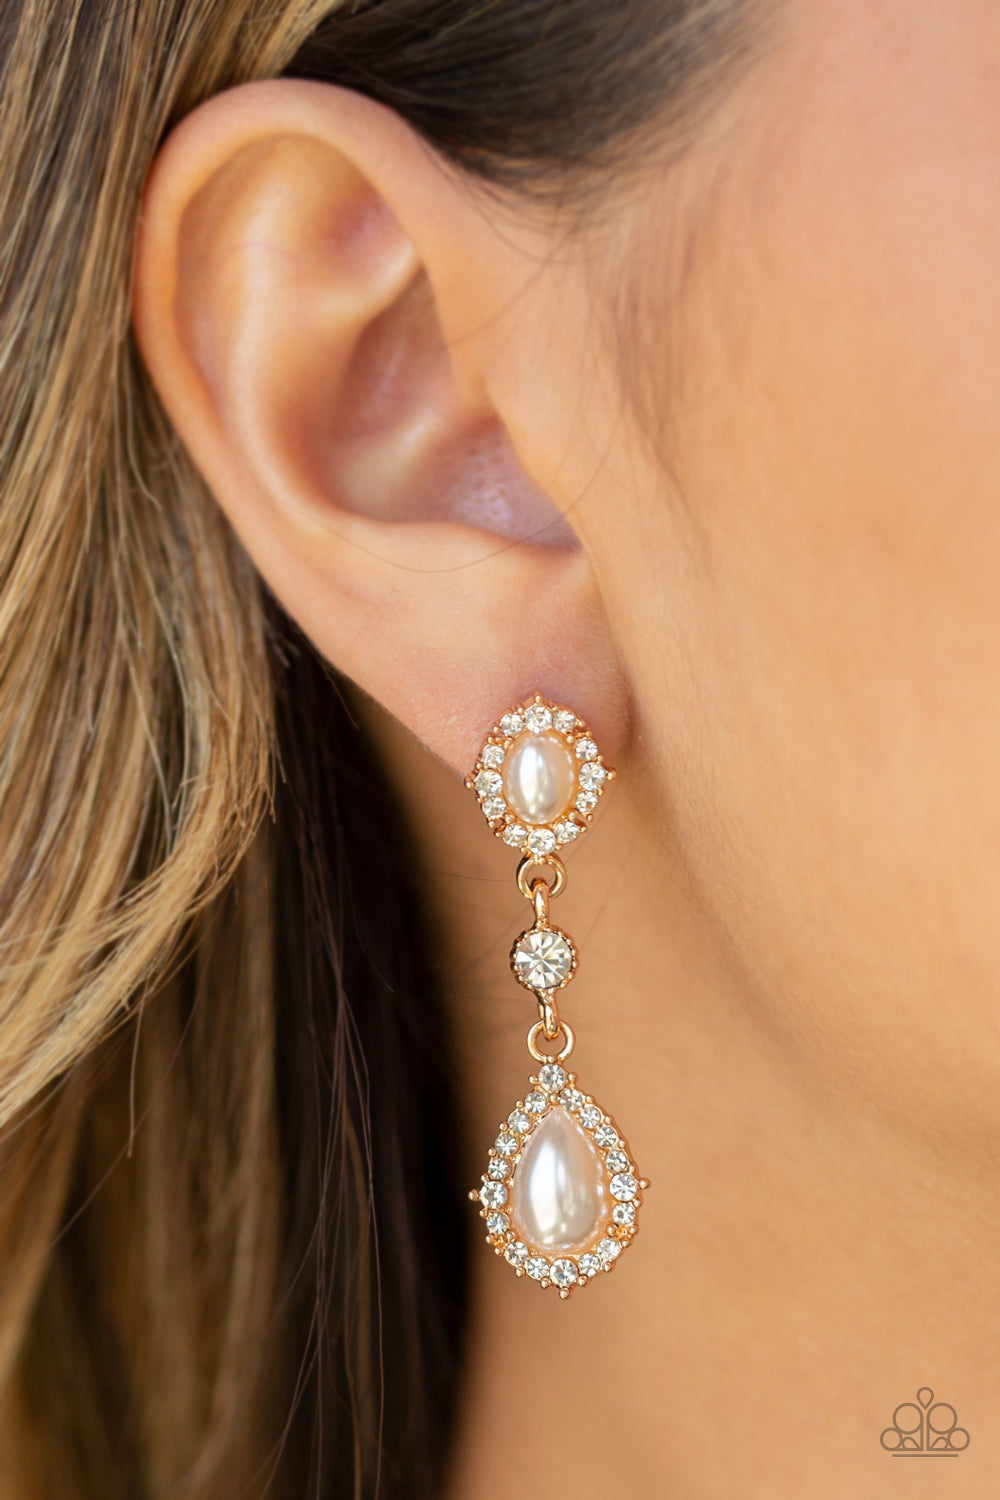 All-GLOWING - Gold, Pearl, and Rhinestone Earrings - Paparazzi Accessories - All That Sparkles XOXO